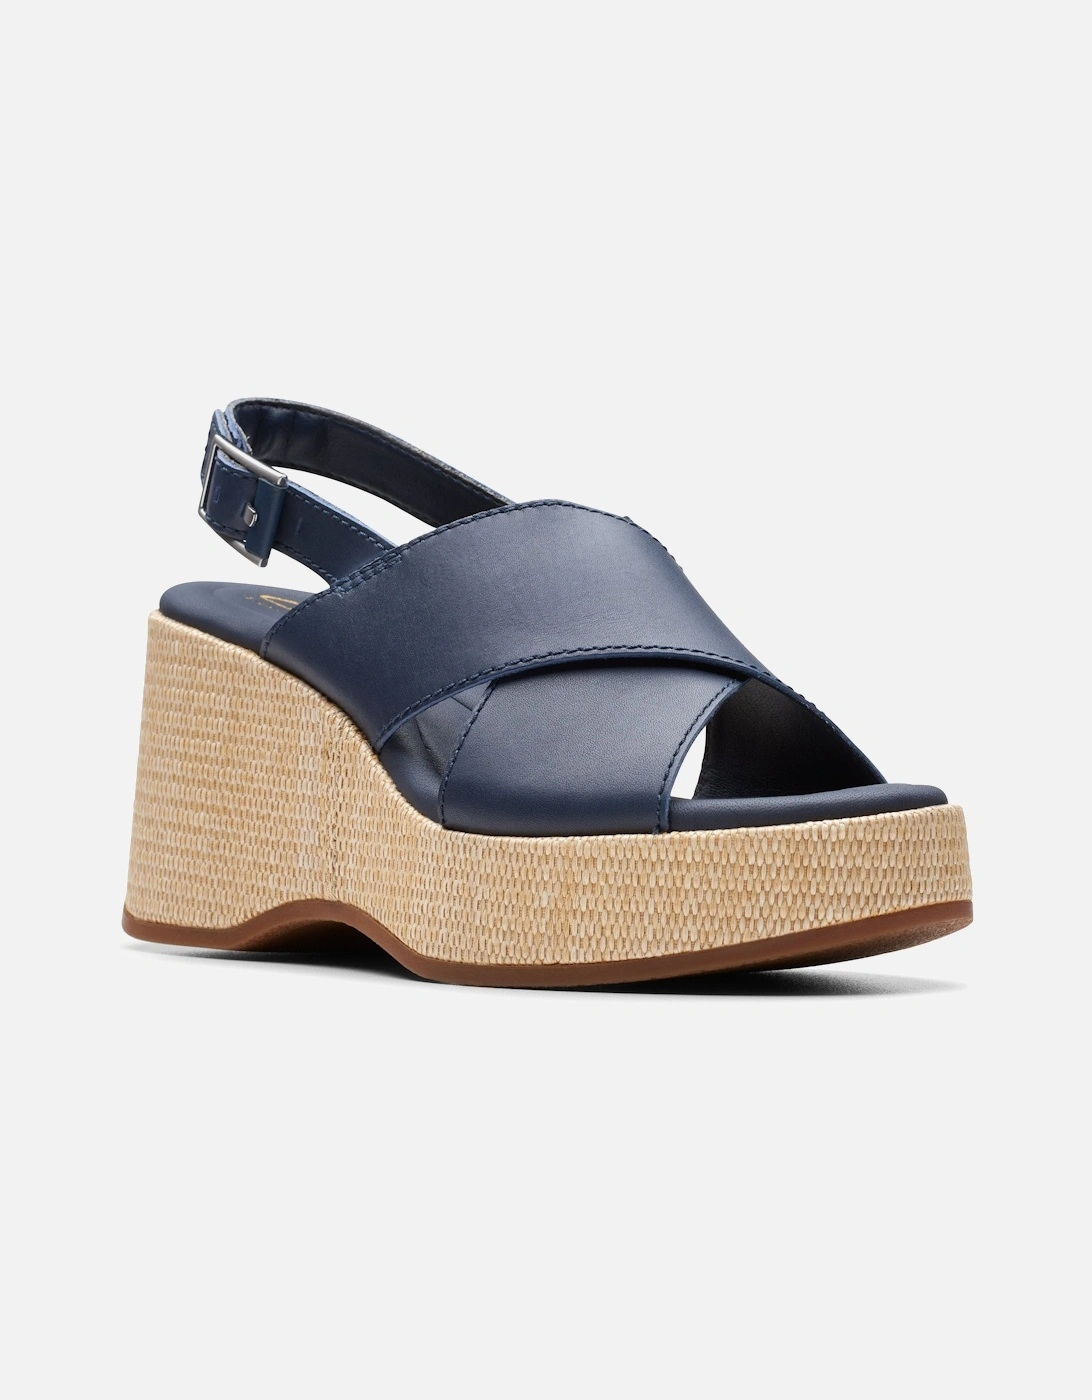 Manon Wish in Navy Leather, 8 of 7